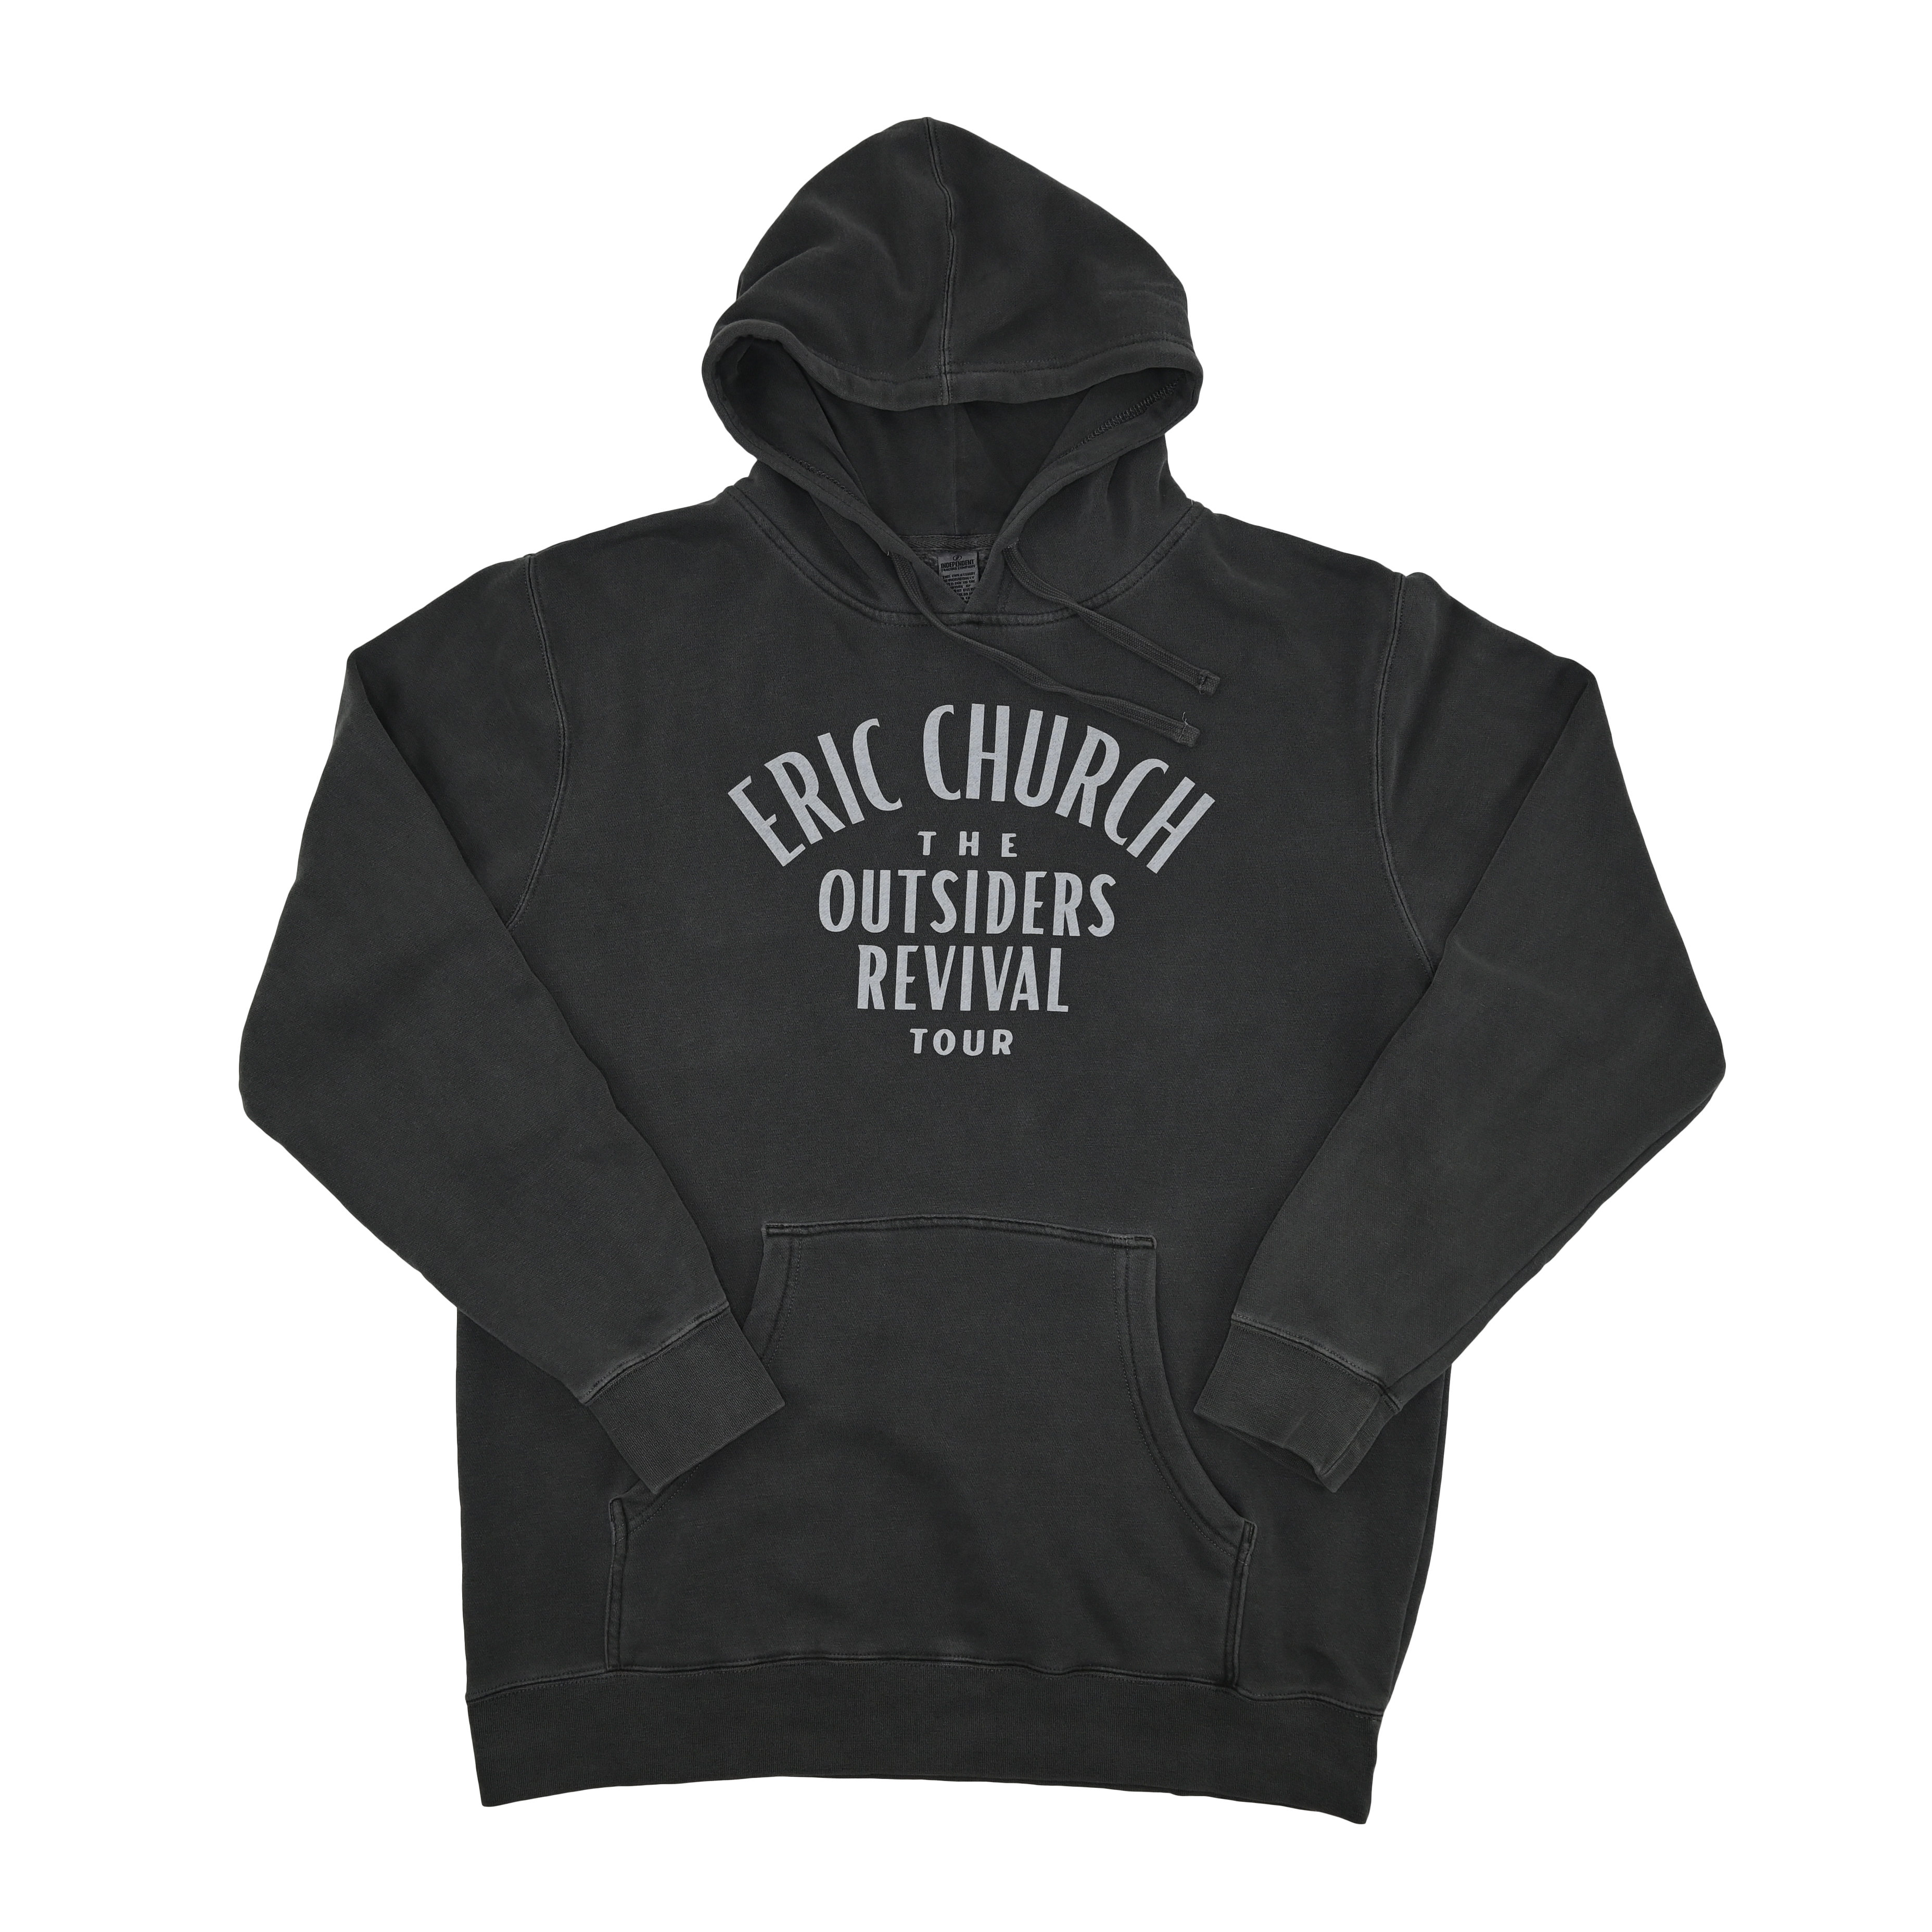 The Outsiders Revival Tour - Pullover Hoodie